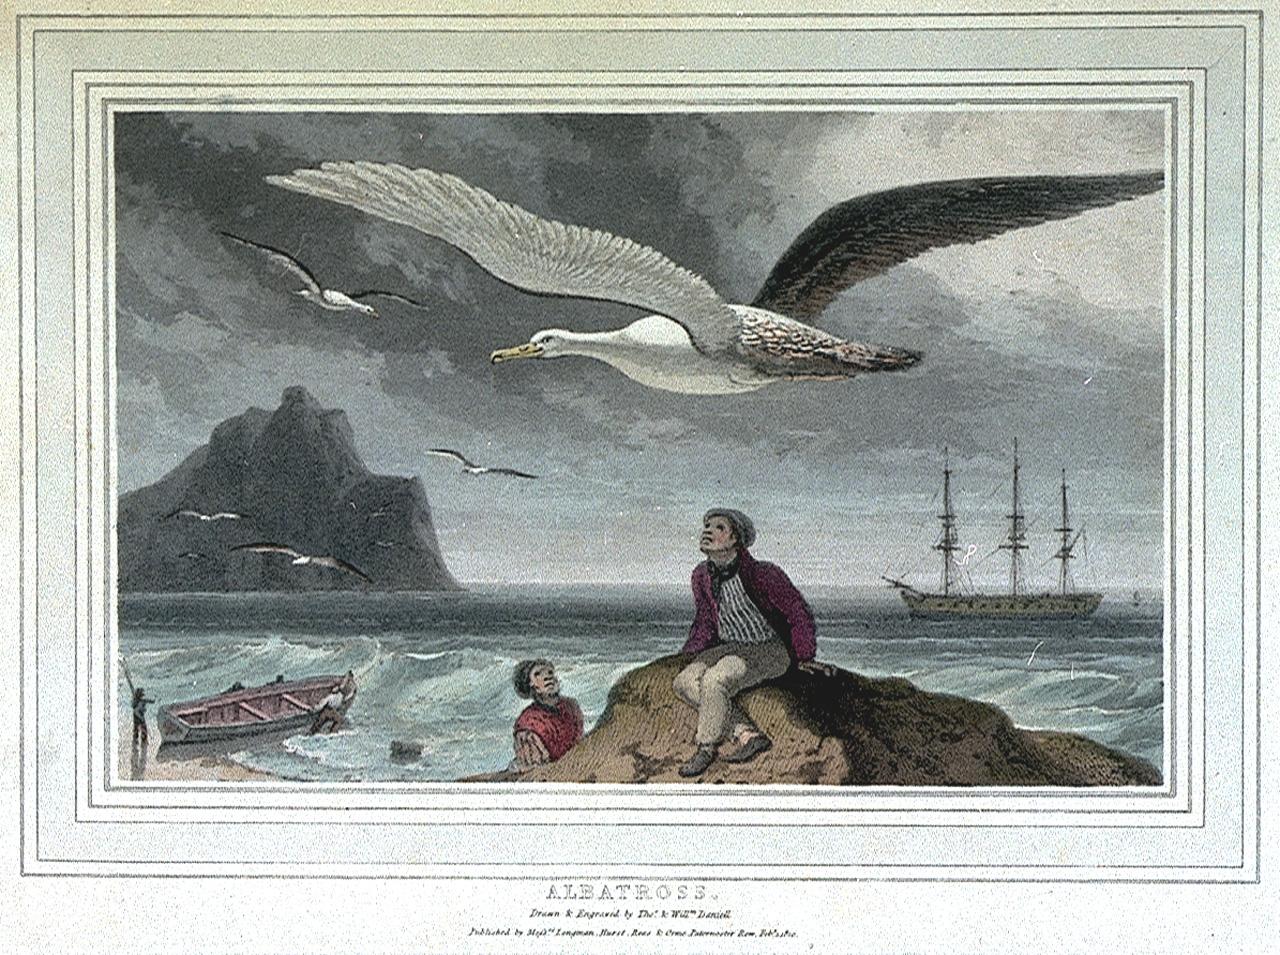 Drawing of a seascape with a man sitting on a rock looking up at a large albatross flying past